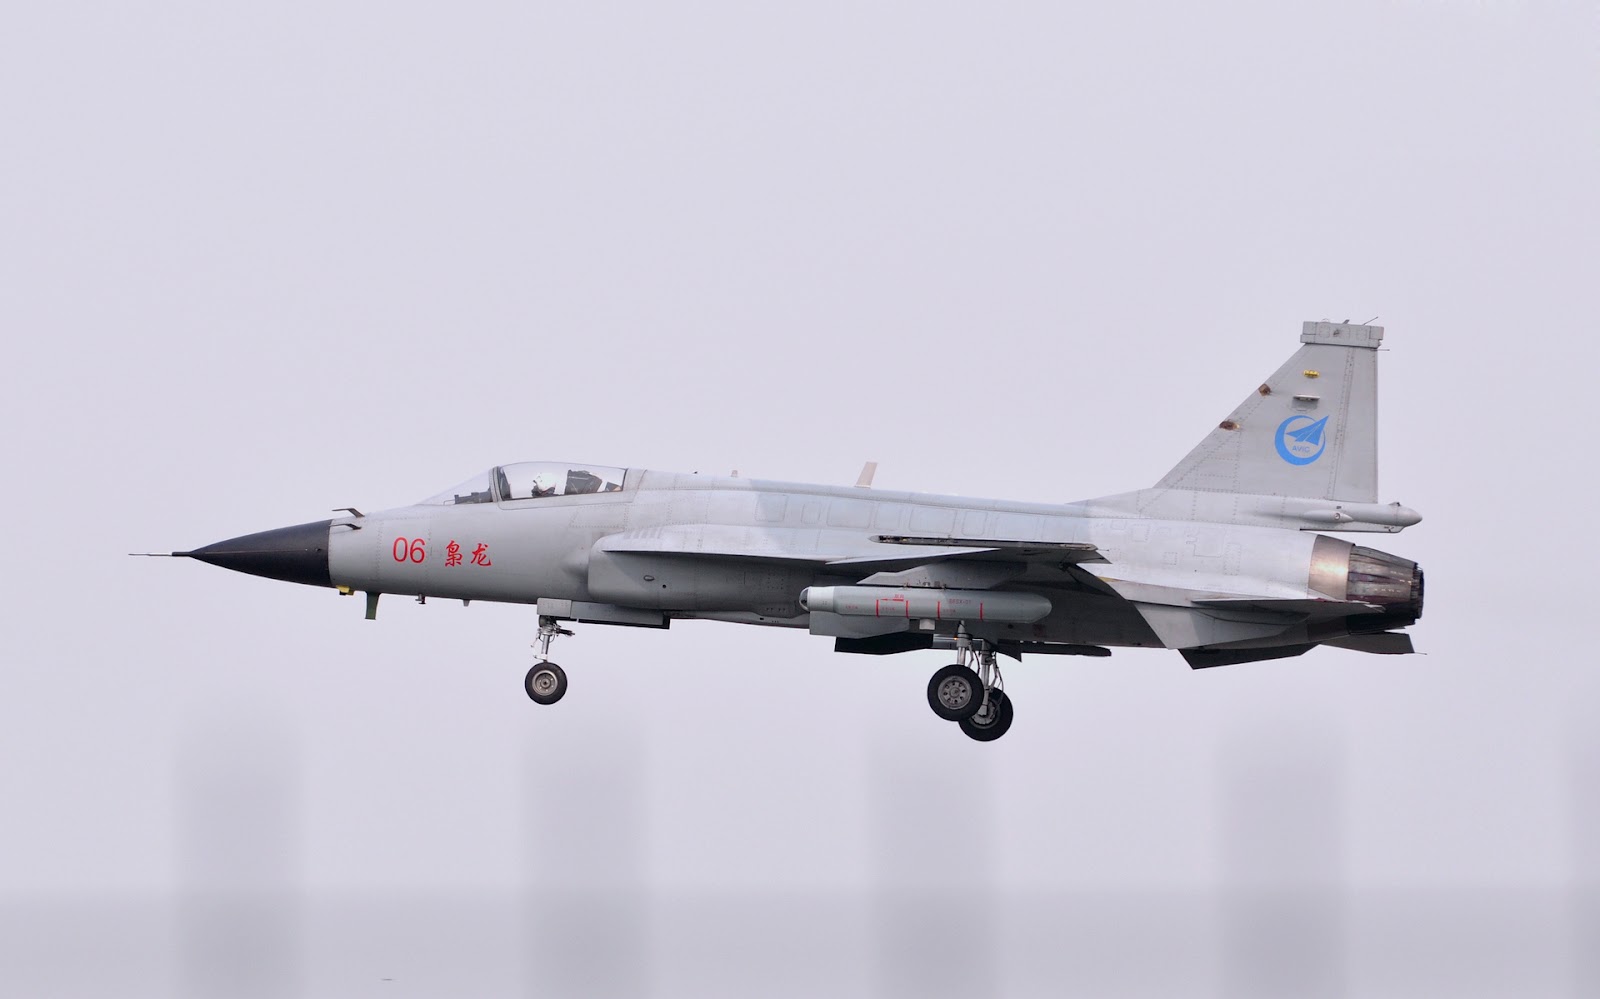 FC-1+JF-17+Thunder+Xiaolong+Fighter+electro+optical+targeting+system+eots+pod+for+fighter+jets+WMD-7+laser-designator+targeting+pod+block+I+II+III+IV+1+2+3+4+PAF+PLAAF+Pakistan+air+force+chinese+china++%25281%2529.jpg